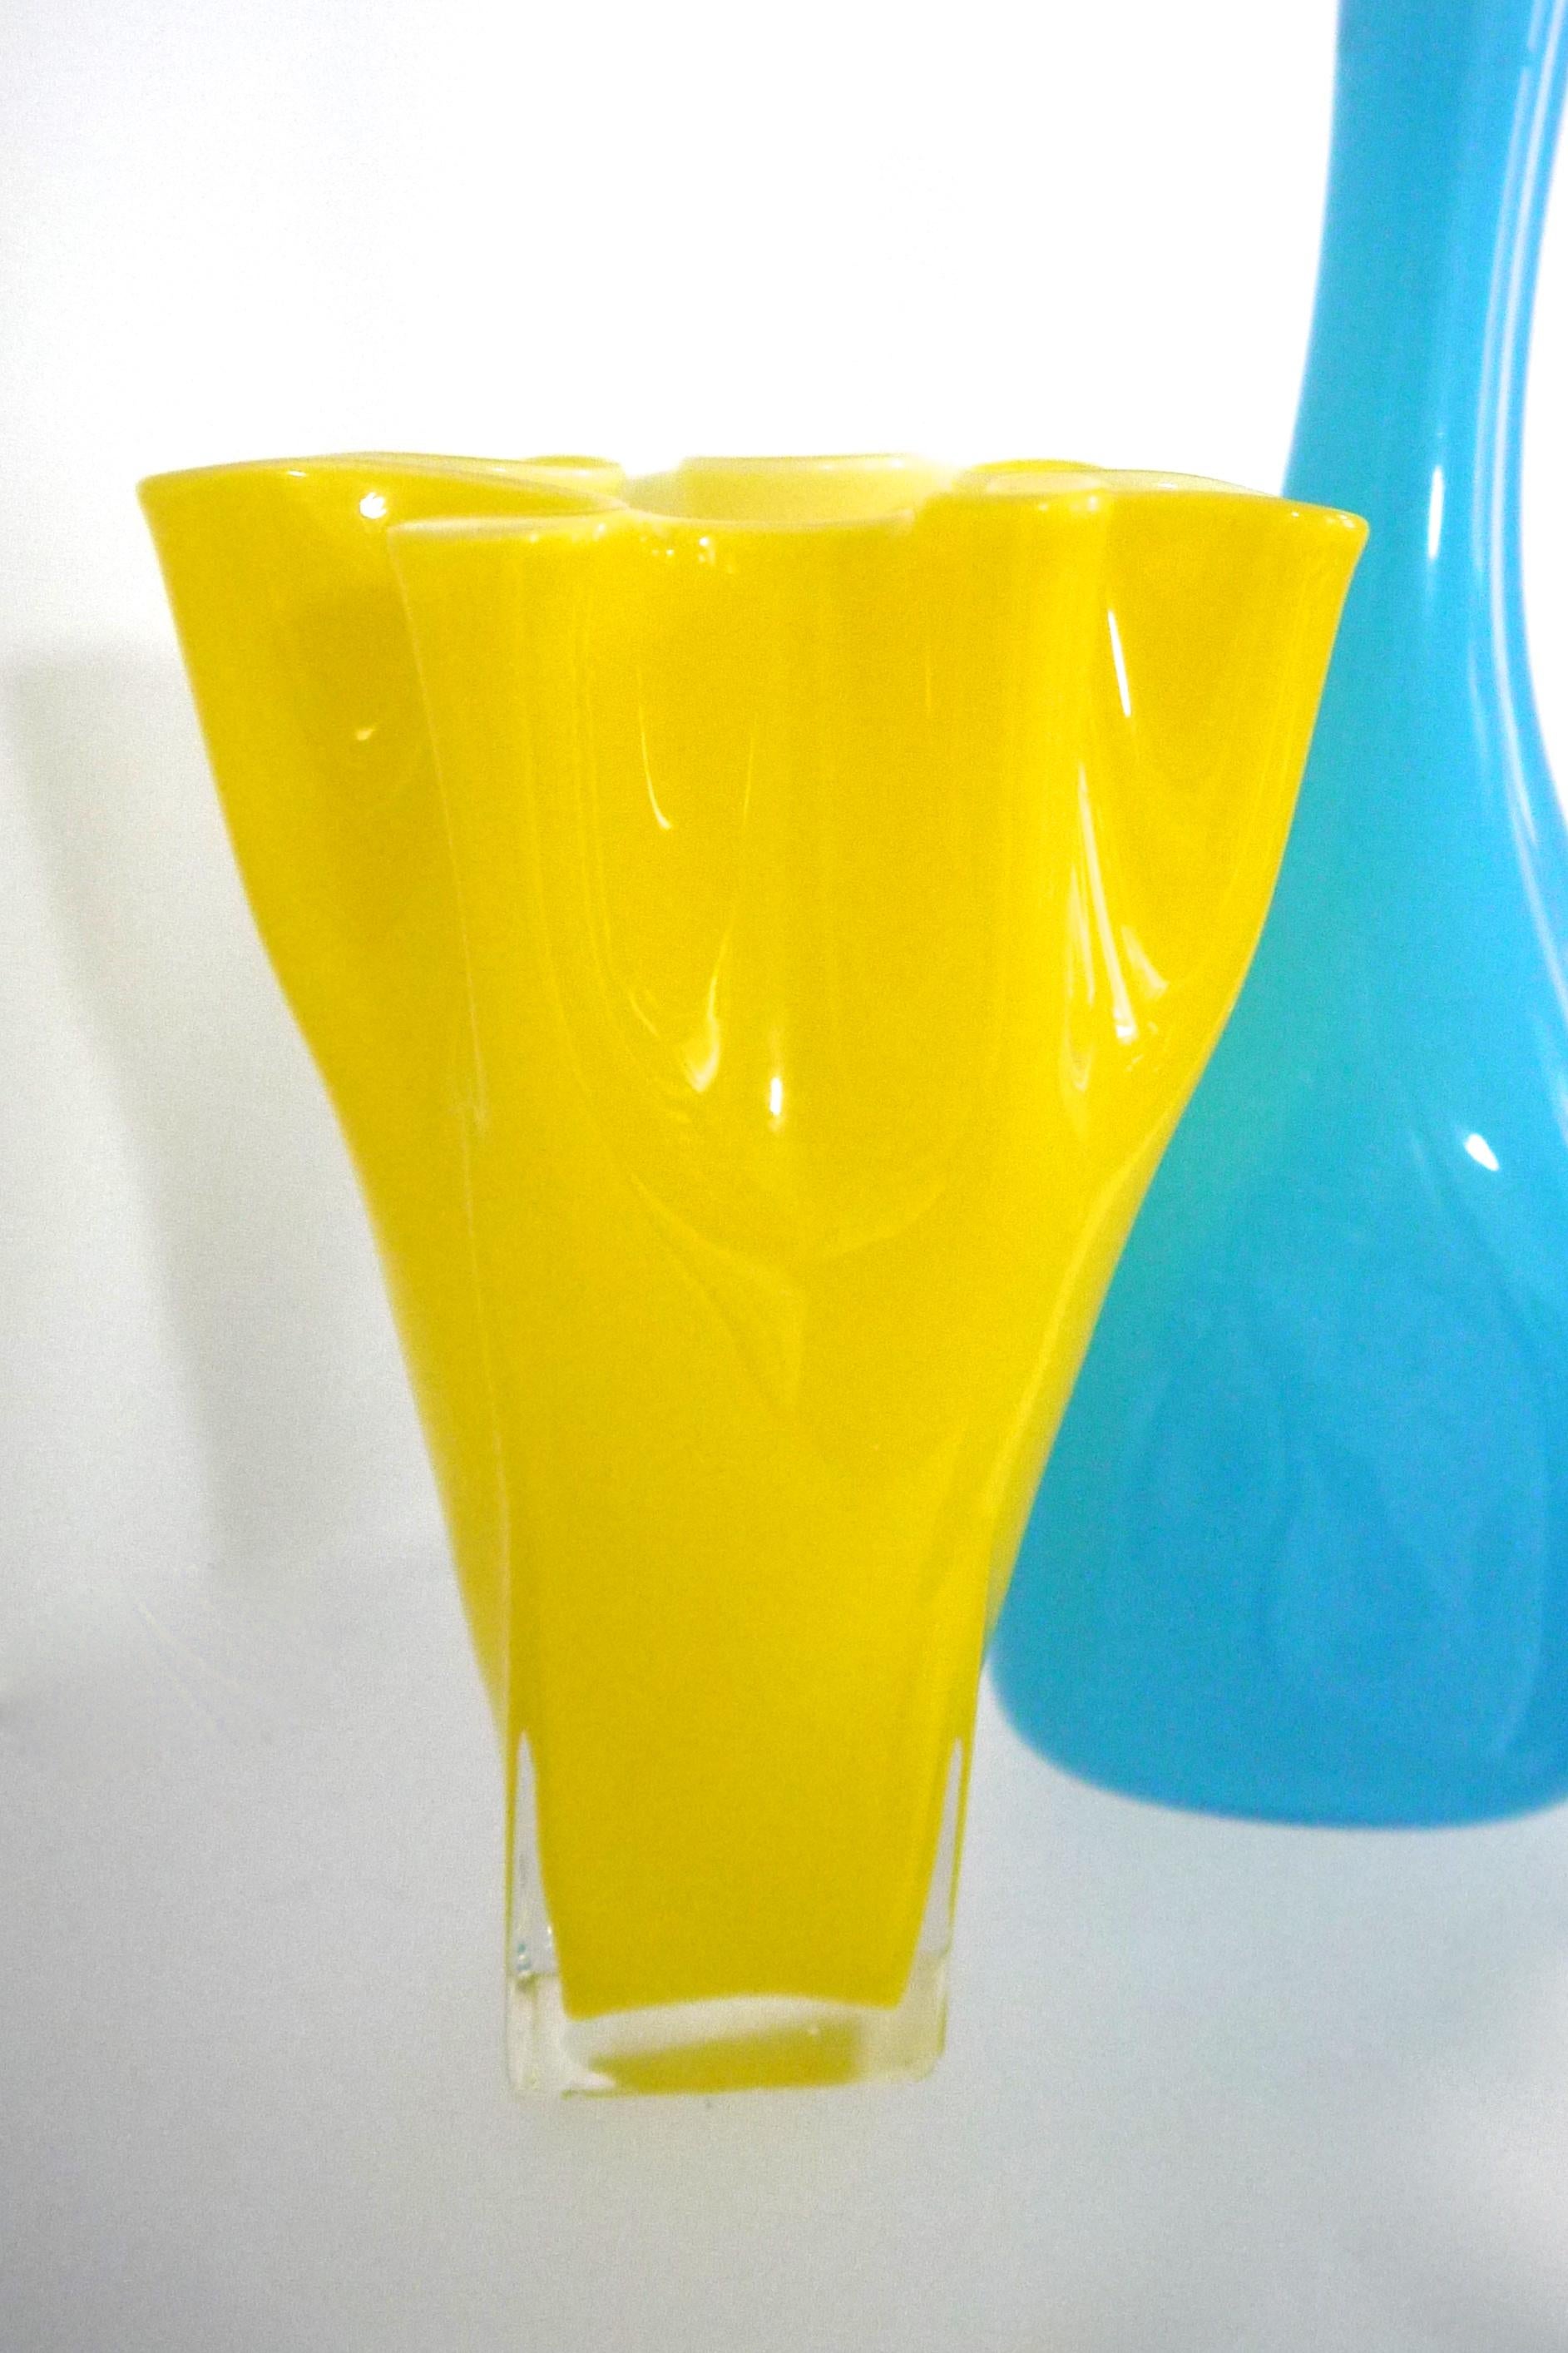 Two Modernist Glass Fazzoletti or 'Handkerchief' Vase with Carafe by Ekenas In Good Condition For Sale In Halstead, GB